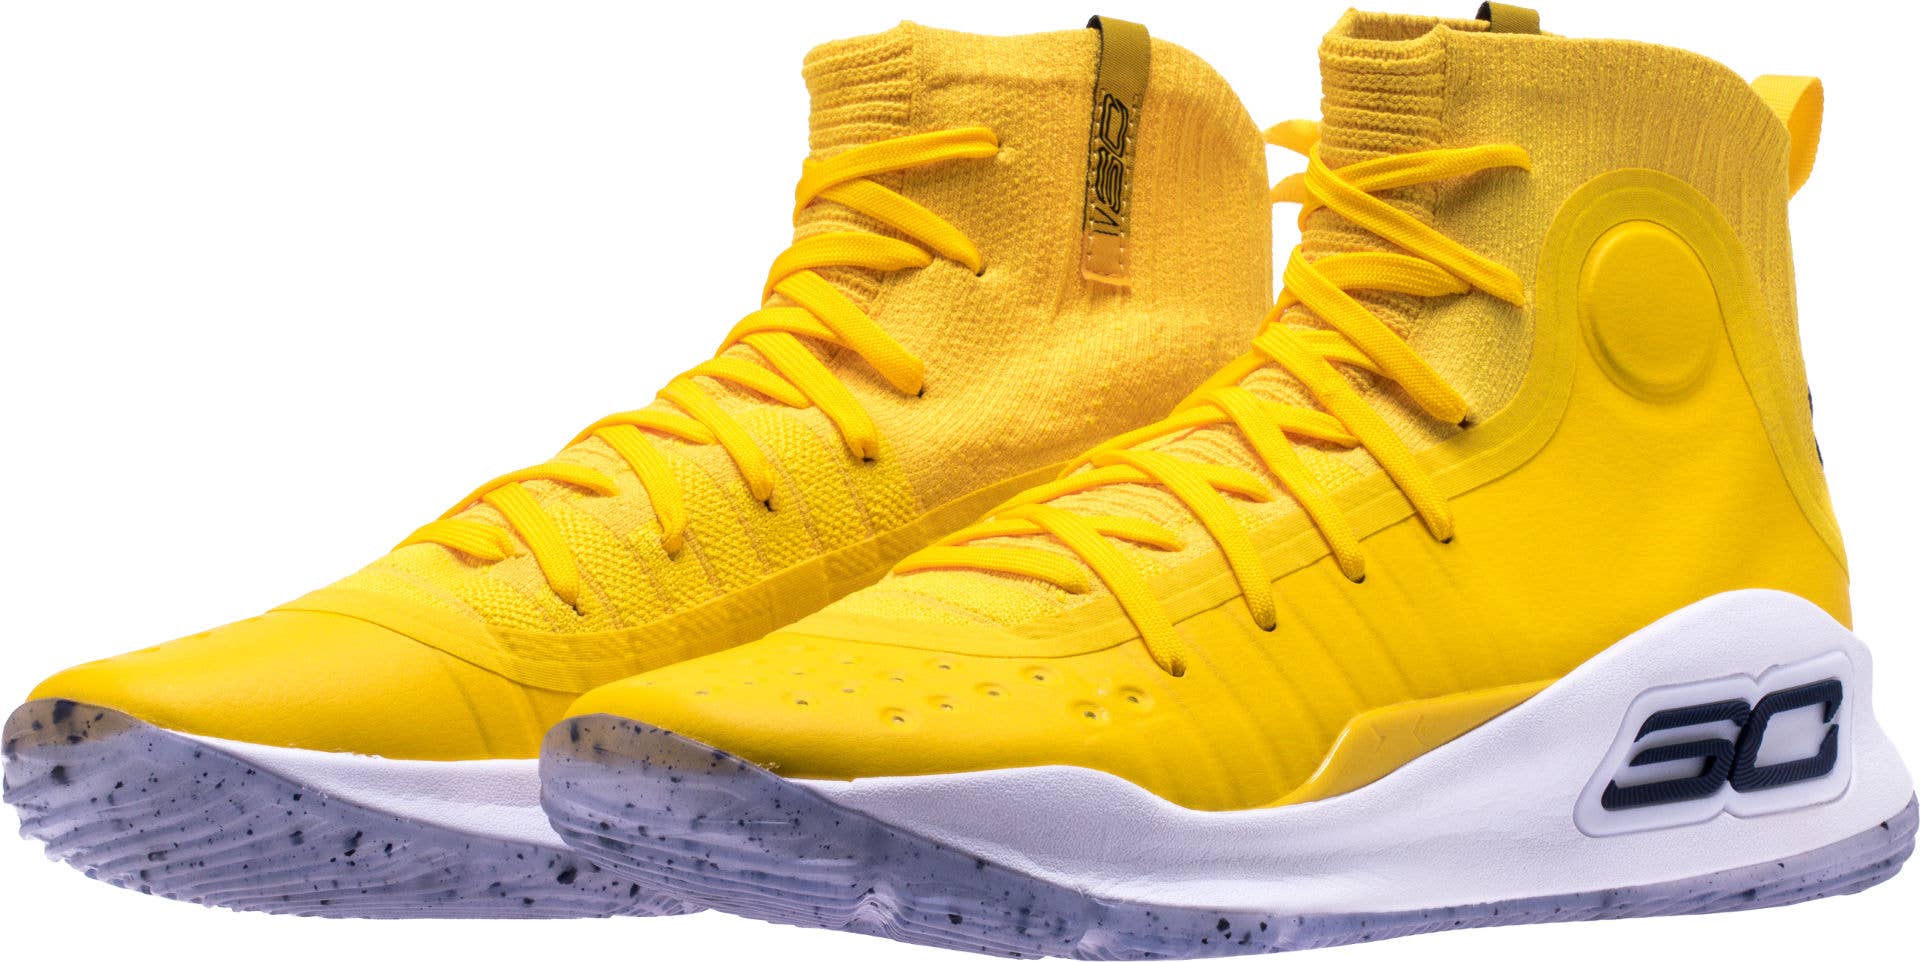 Shoe Palace Under Armour Curry 4 'Yellow/Blue' 1298306 700 (Pair)